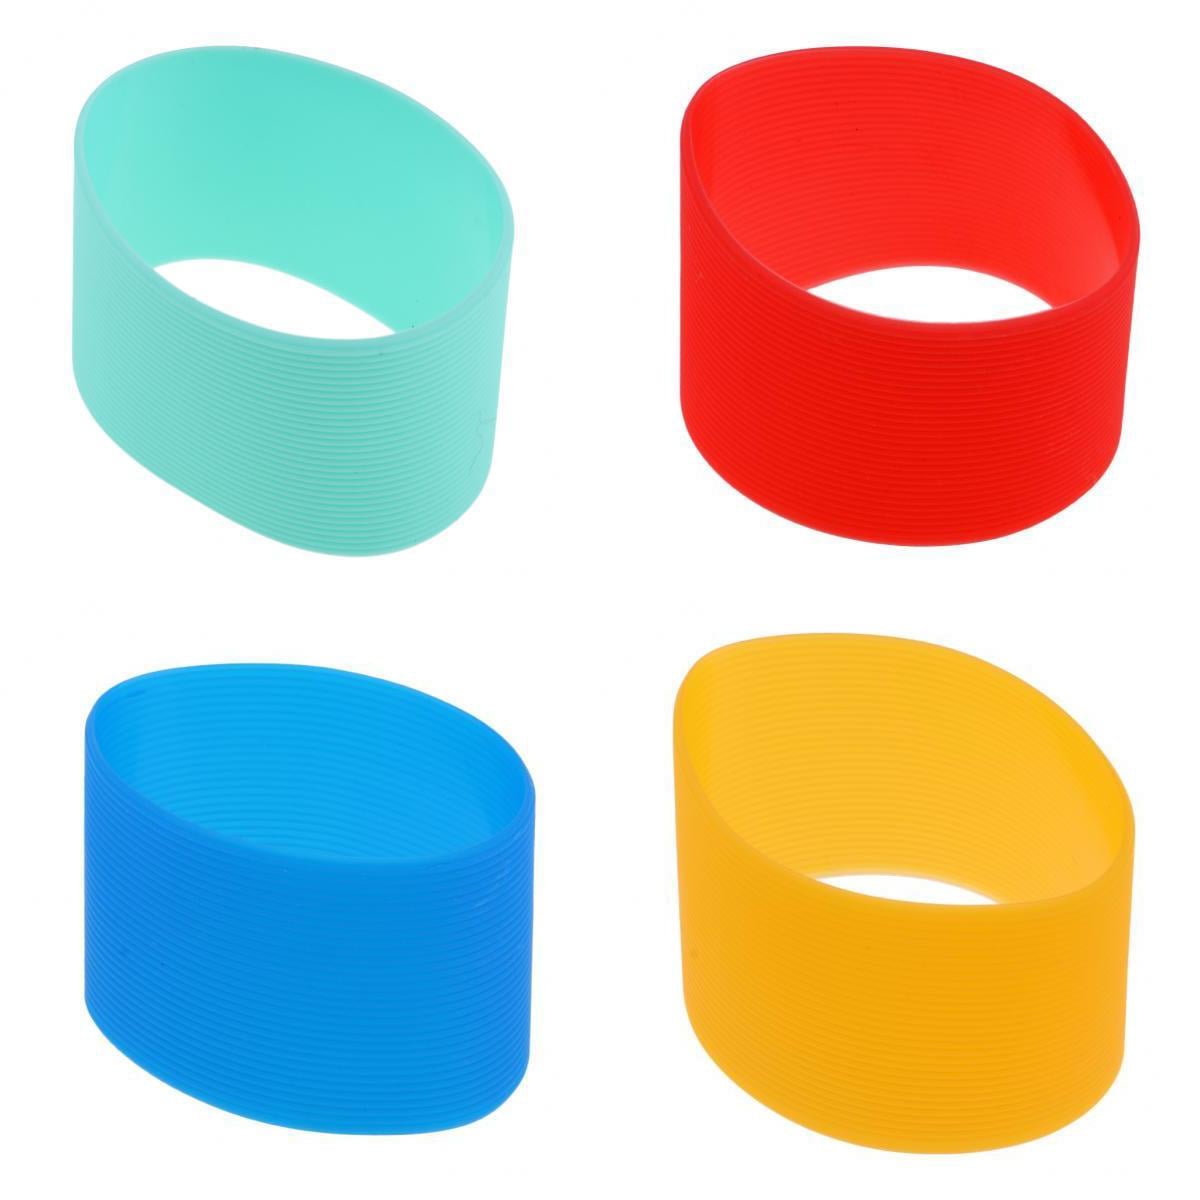 4x Outdoor Silicone Round Non-slip Water Bottle Mug Cup Sleeve Protect Cover 